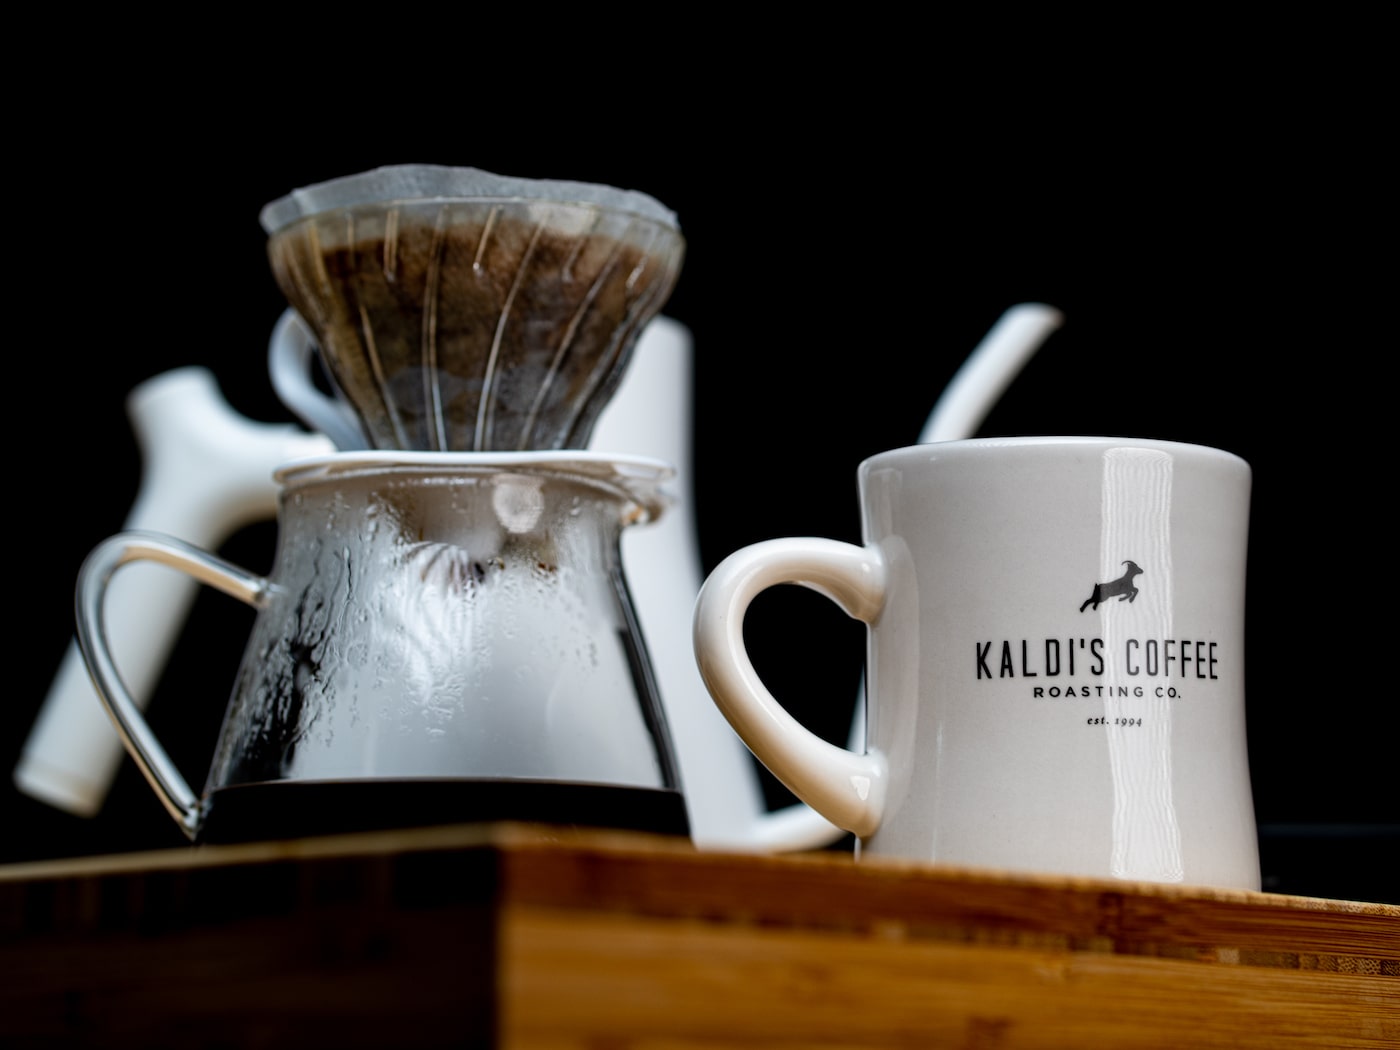 Completed brew on the V60 next to a Kaldi's Coffee Diner Mug